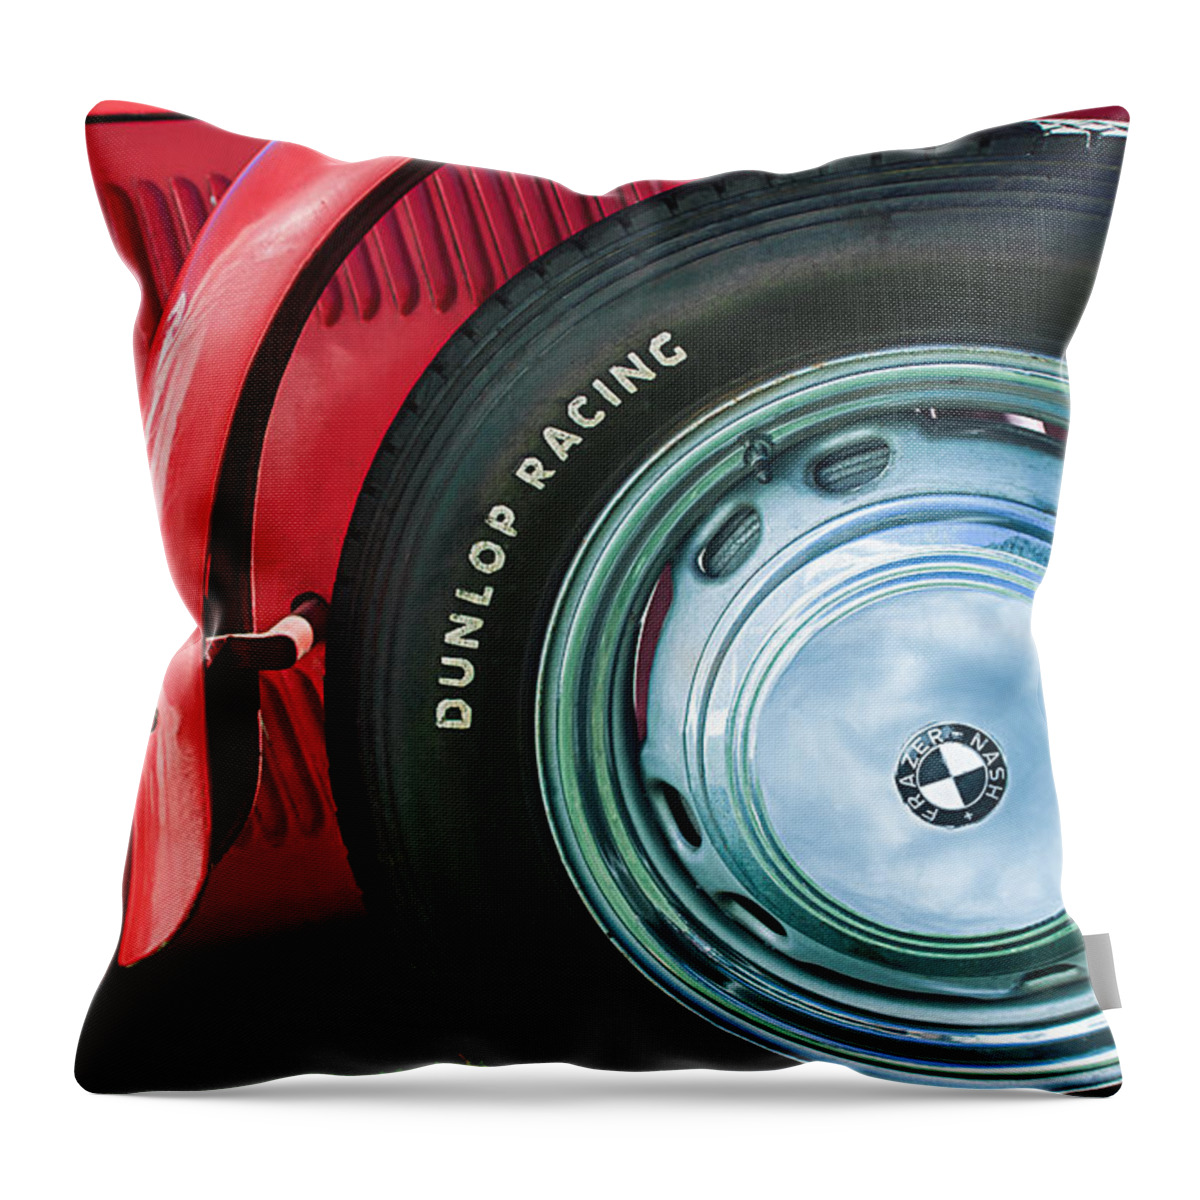 1952 Frazer-nash Le Mans Replica Mkii Competition Model Tire Emblem Throw Pillow featuring the photograph 1952 Frazer-Nash Le Mans Replica MkII Competition Model Tire Emblem #3 by Jill Reger